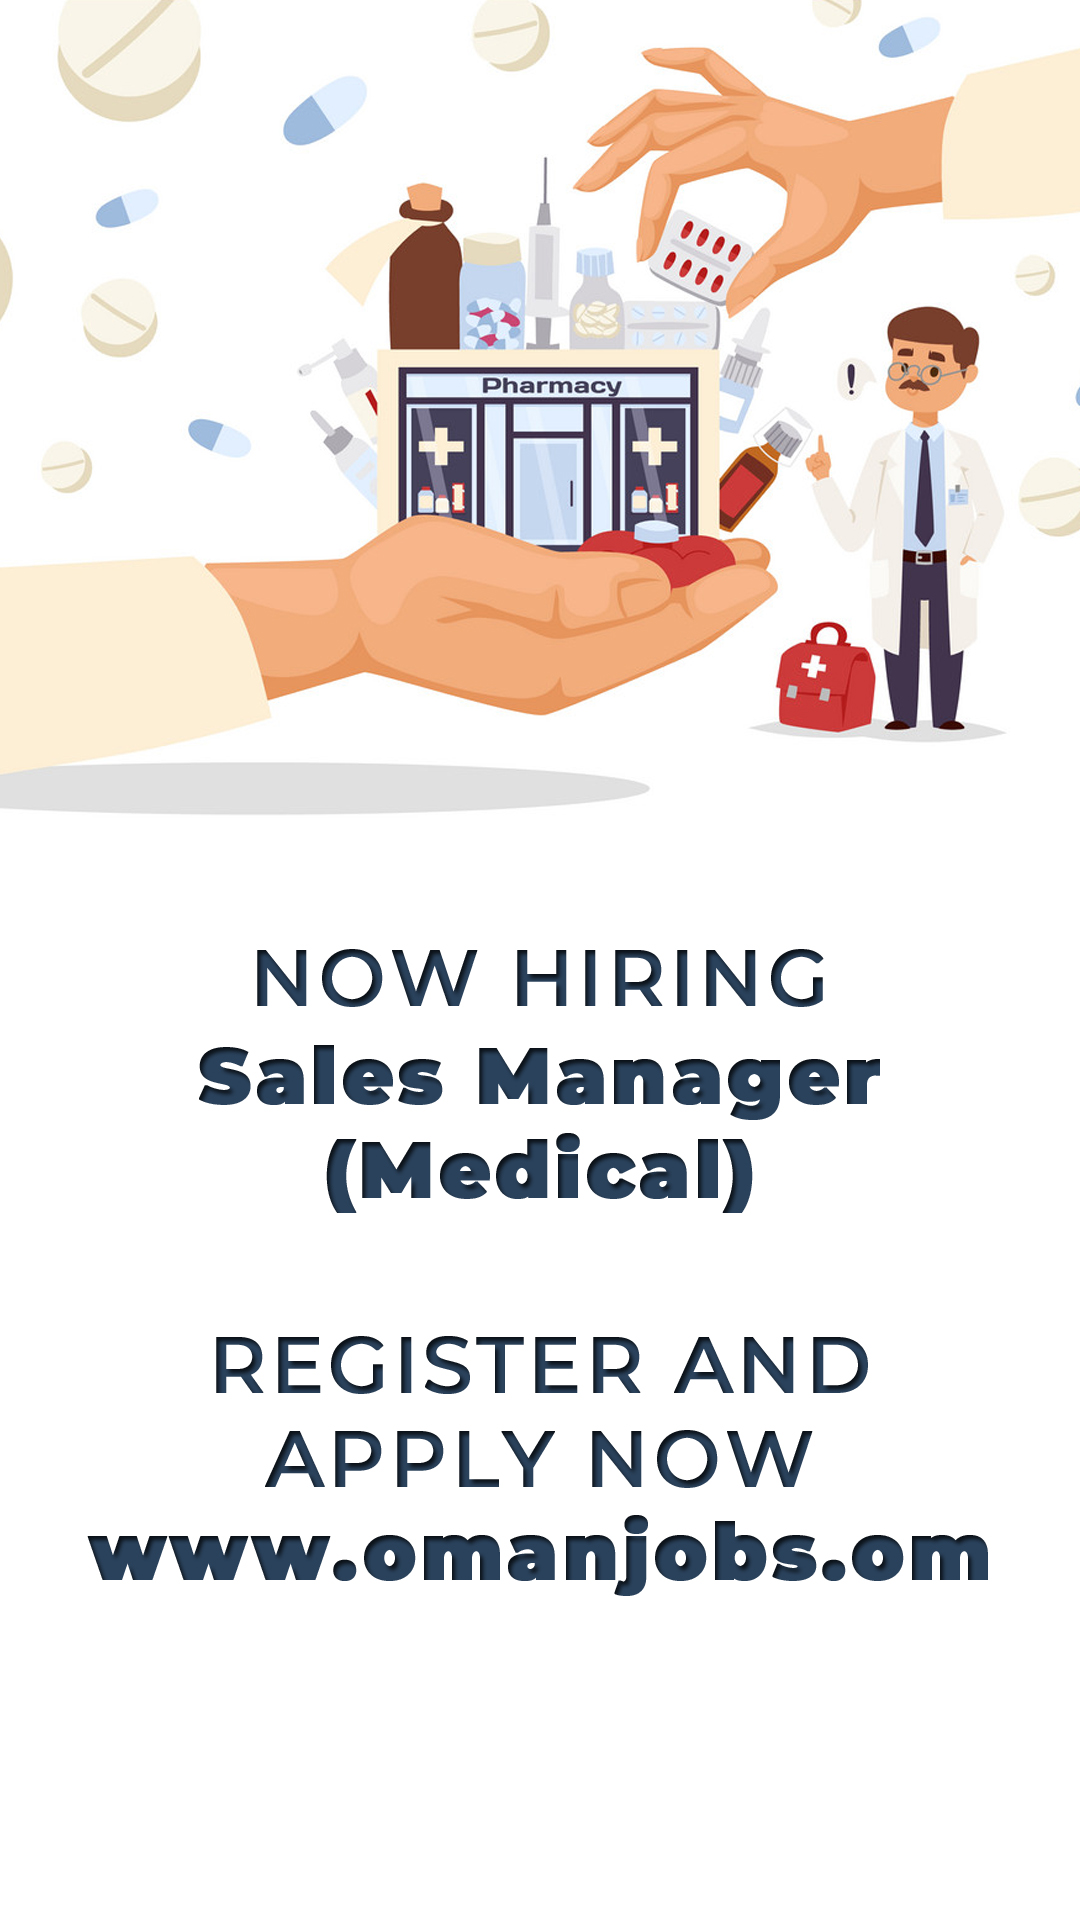 NOW HIRING Sales Manager (Medical)